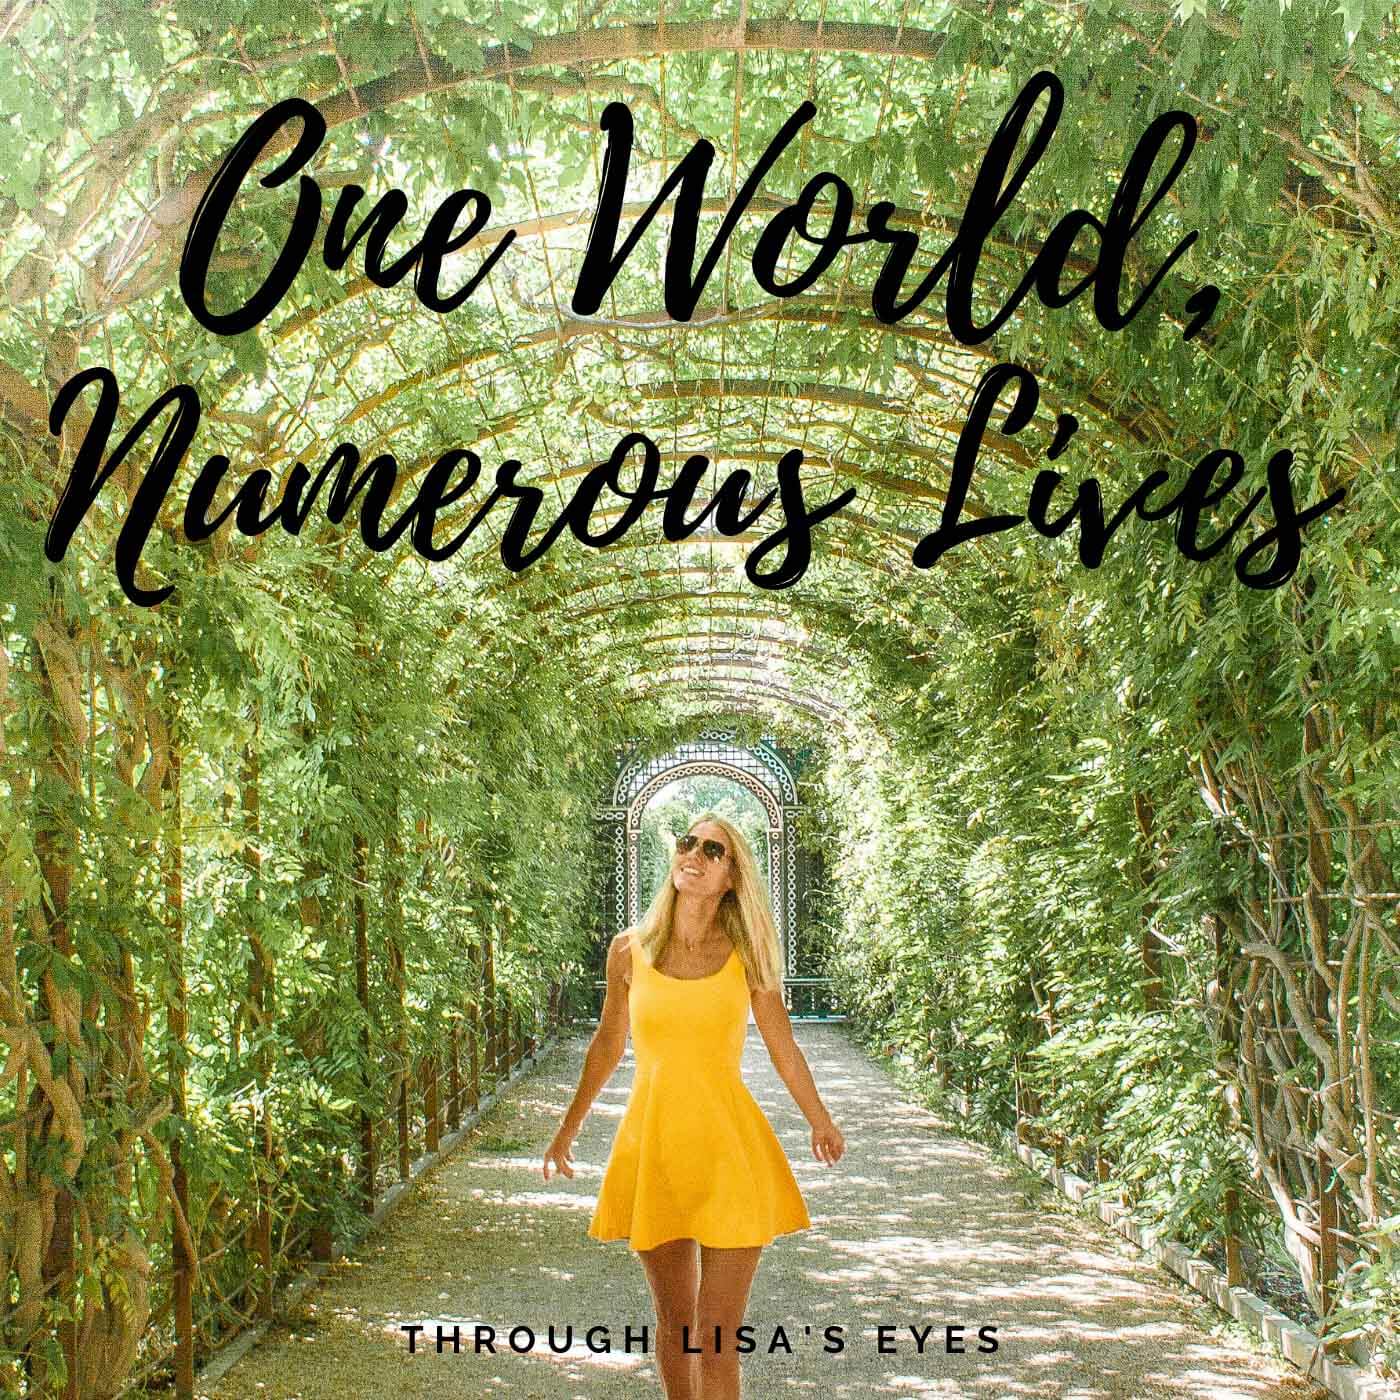 the podcast one world numerous lives aims to give inspirational thoughts by presenting a variety of different life stories while I interview my international network friends